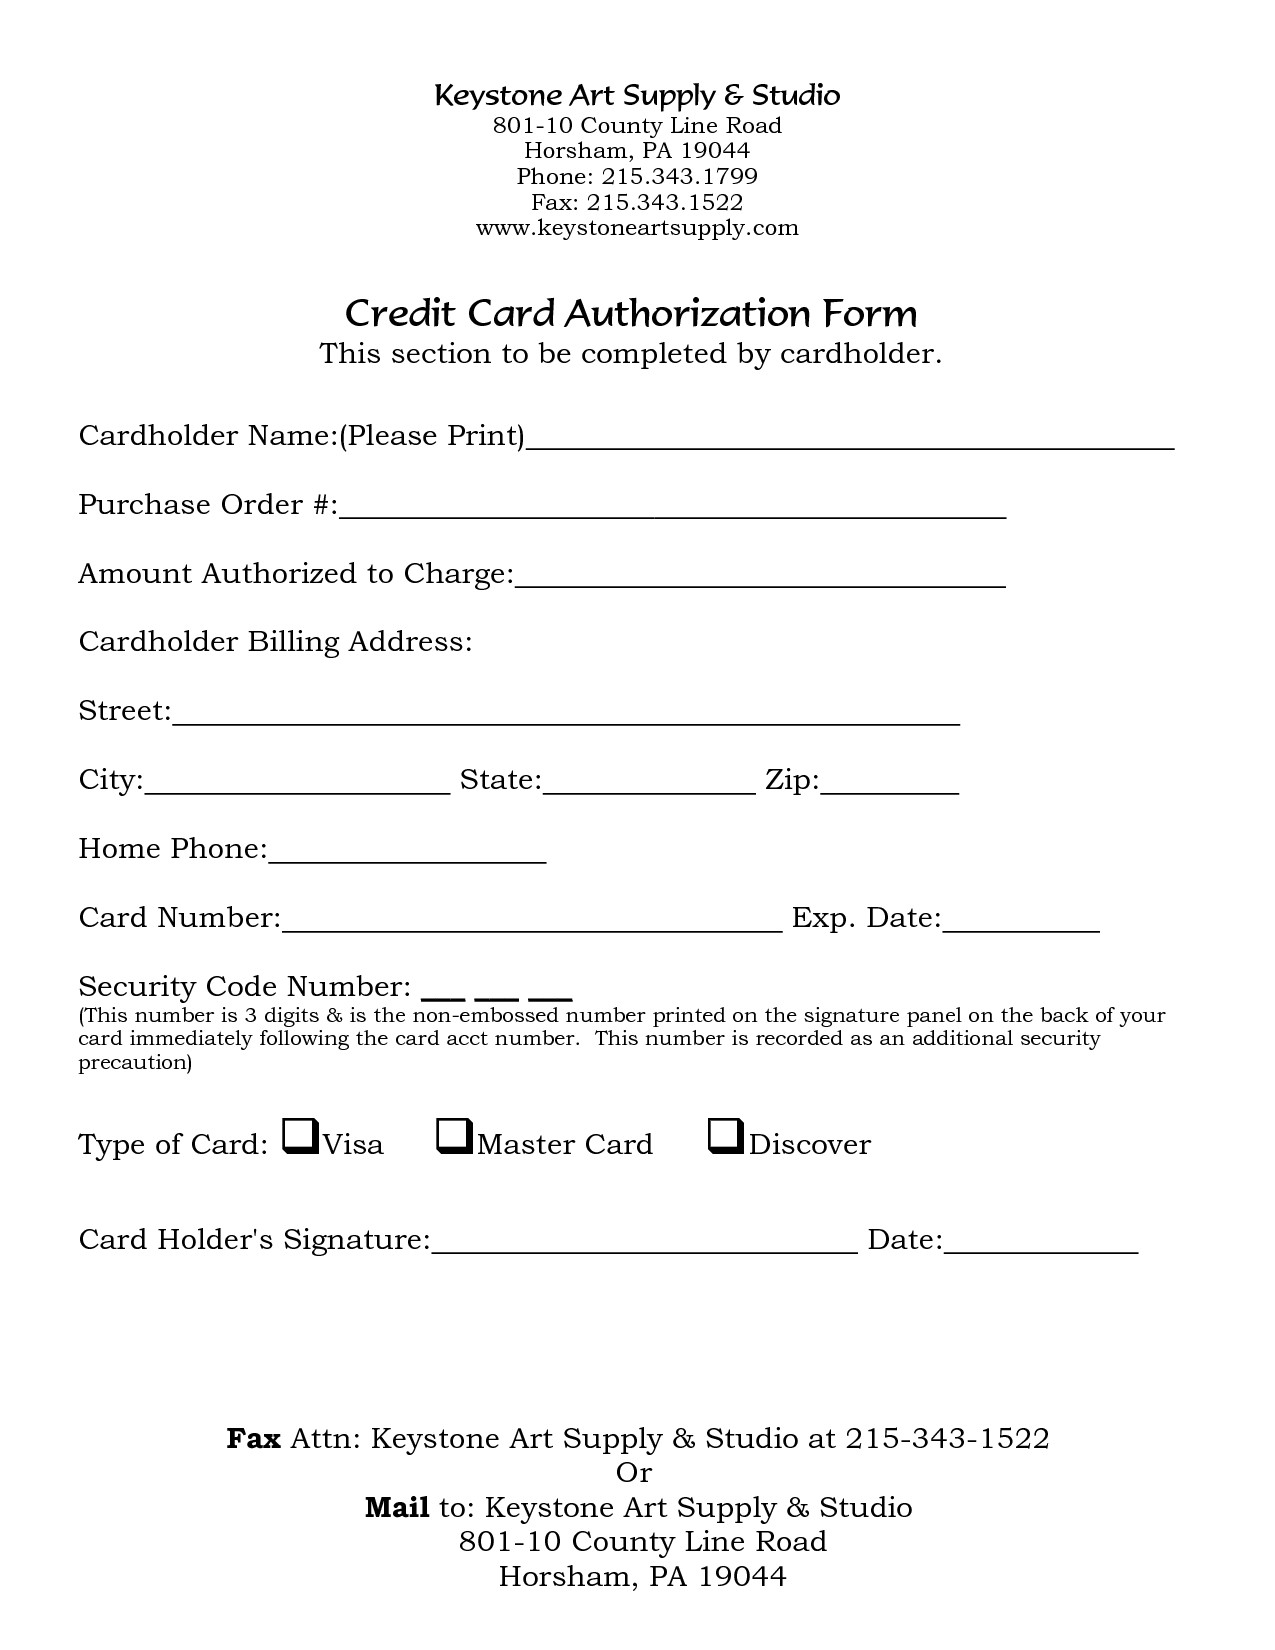 5 Credit Card Form Templates formats Examples in Word Excel